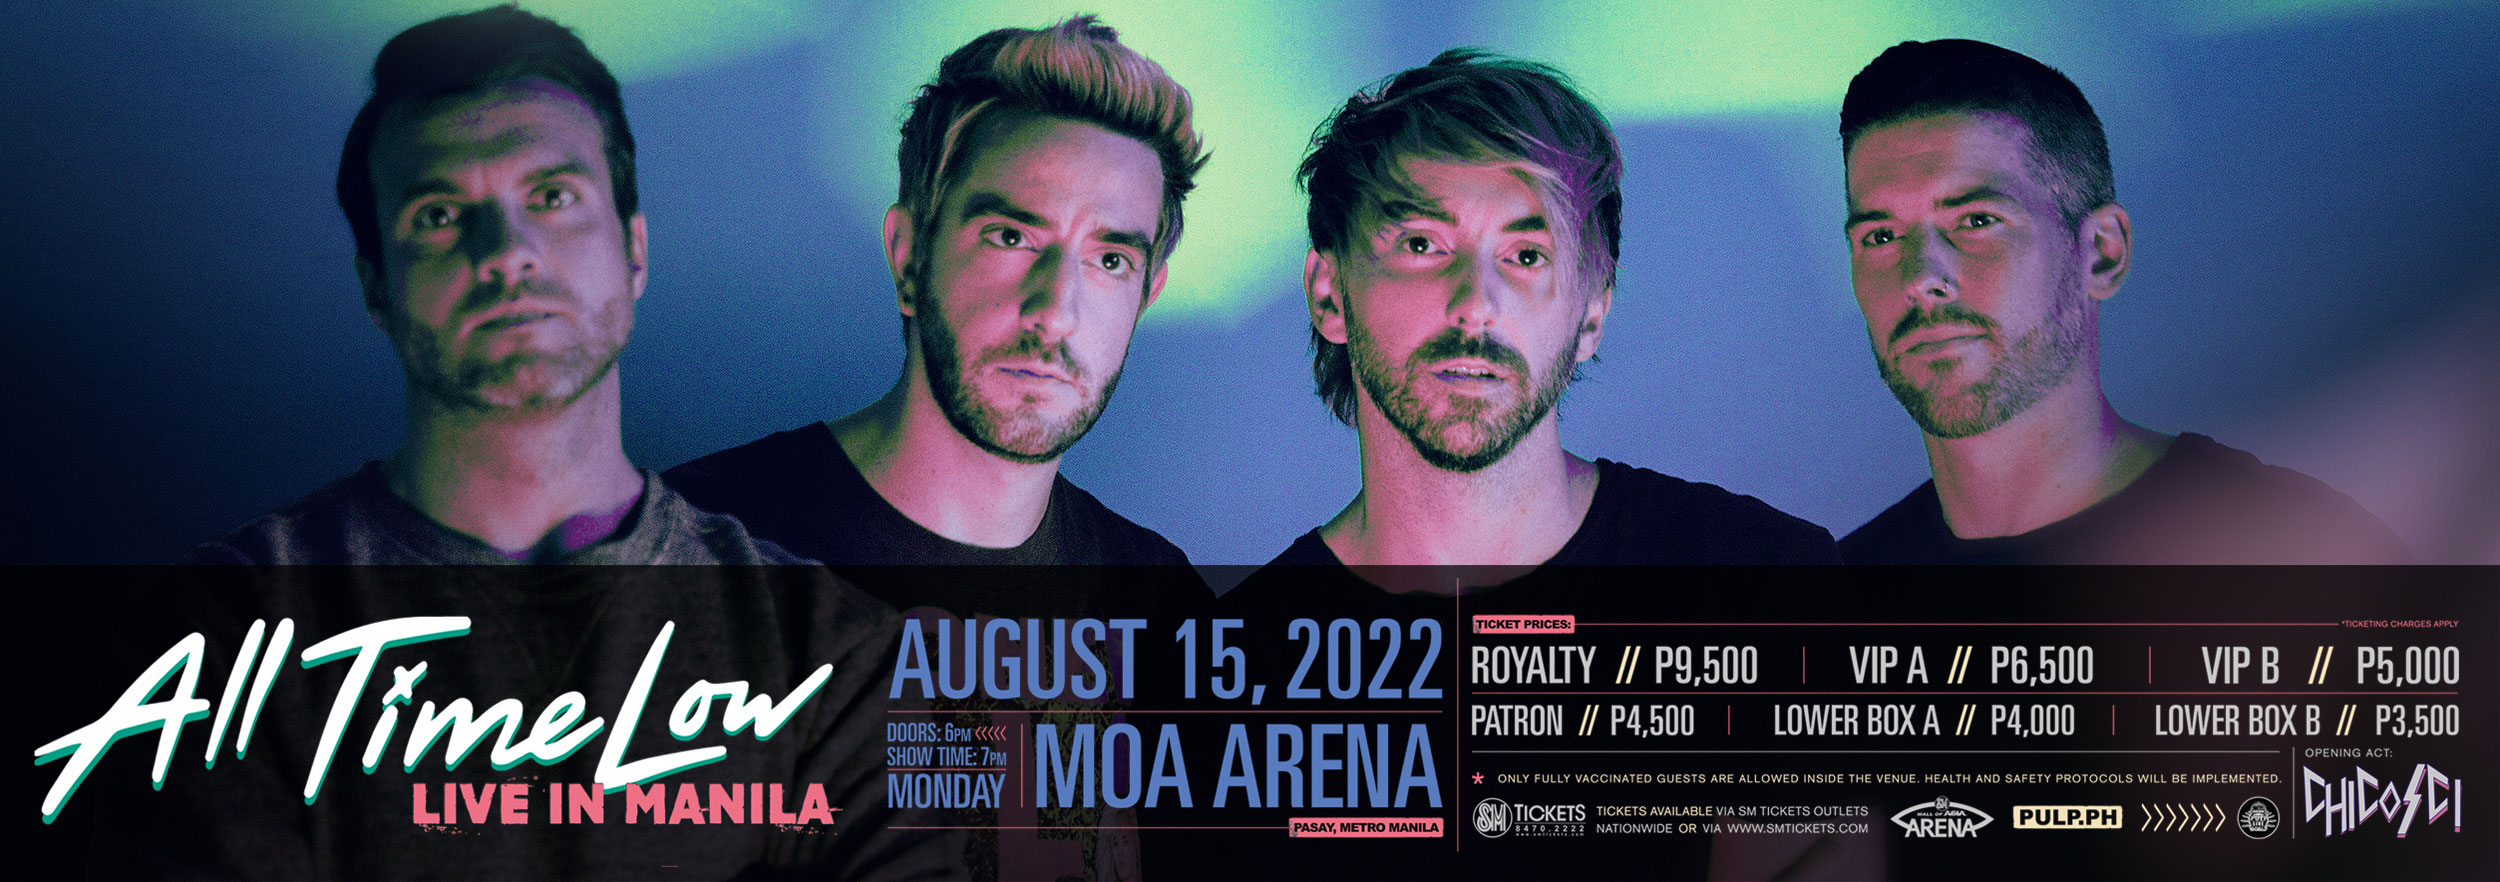 ALL TIME LOW RETURNS TO MANILA With Special Guests CHICOSCI